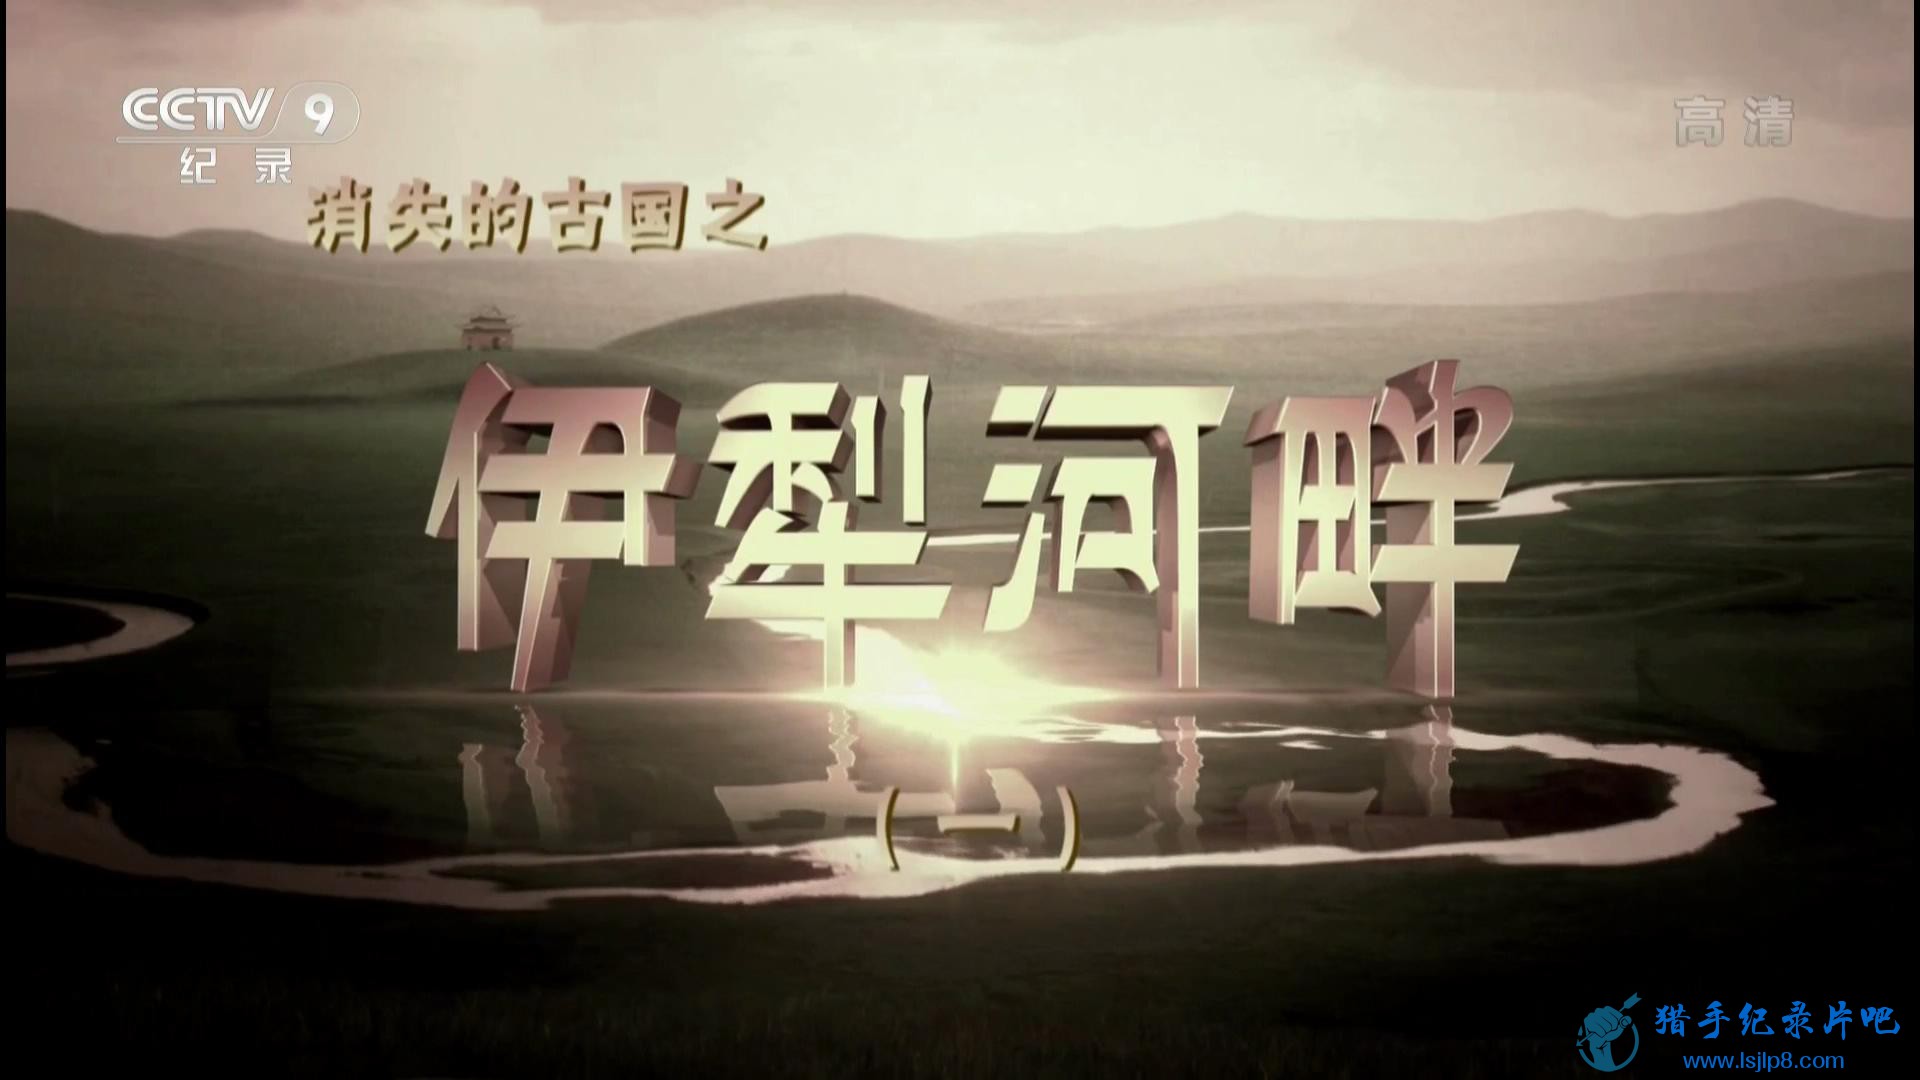 20150907_CCTV-9_Special.Edition-The.Disappeared.Ancient.States.by.the.Ili.River..jpg